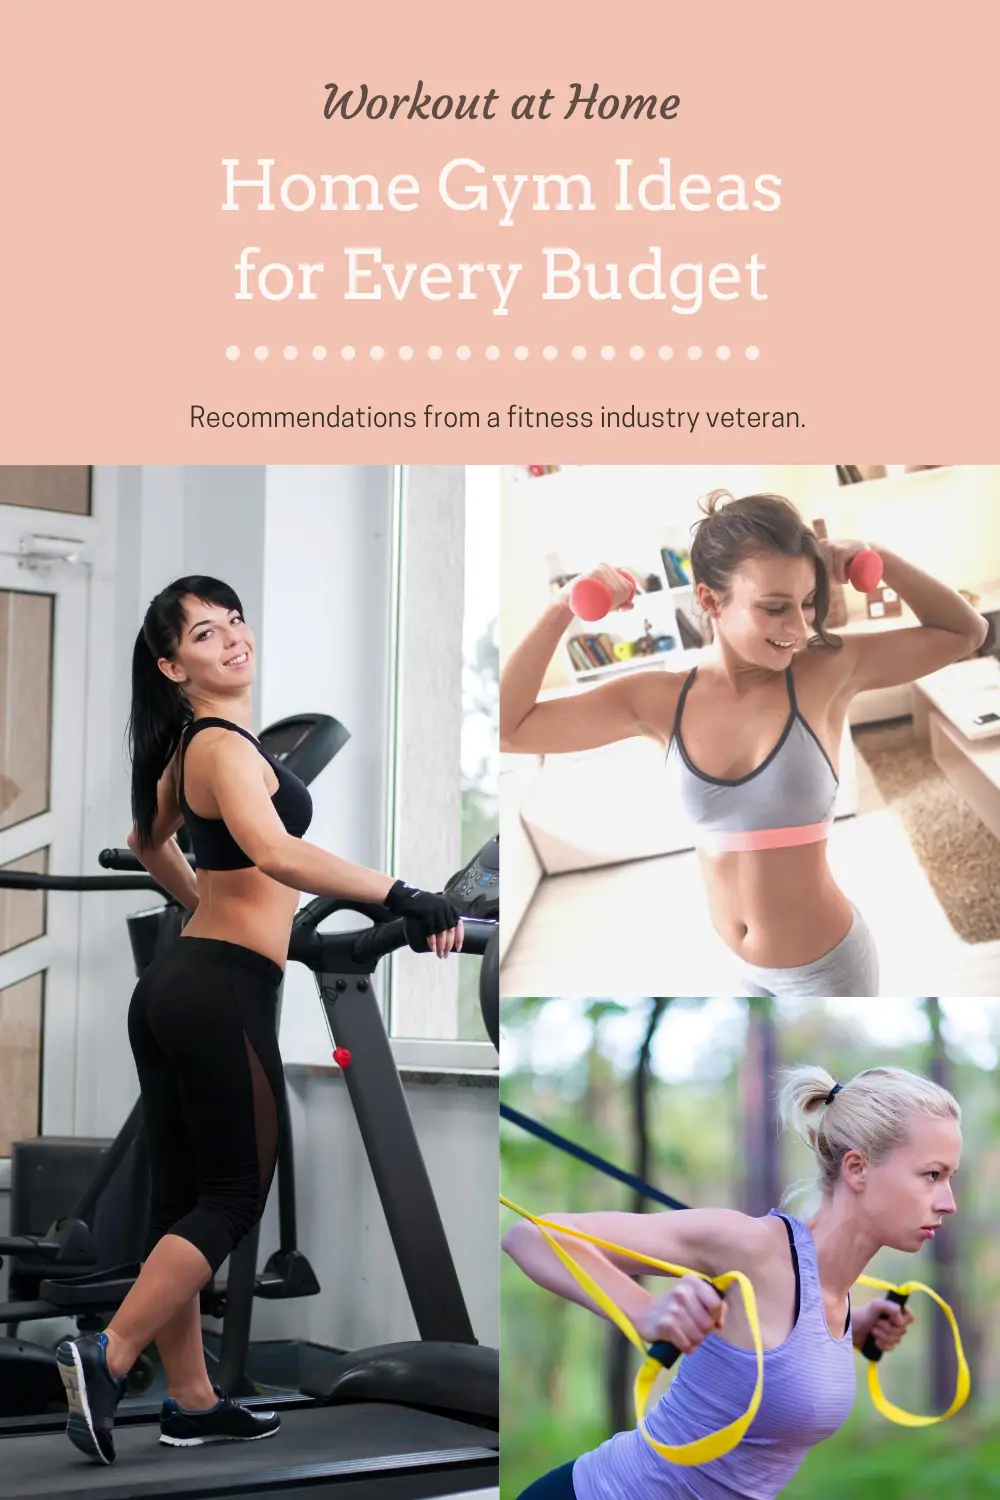 Build a home gym for every budget for an effective strength + cardio workout at home. #homegym #fitness #homeworkout #healthyliving 